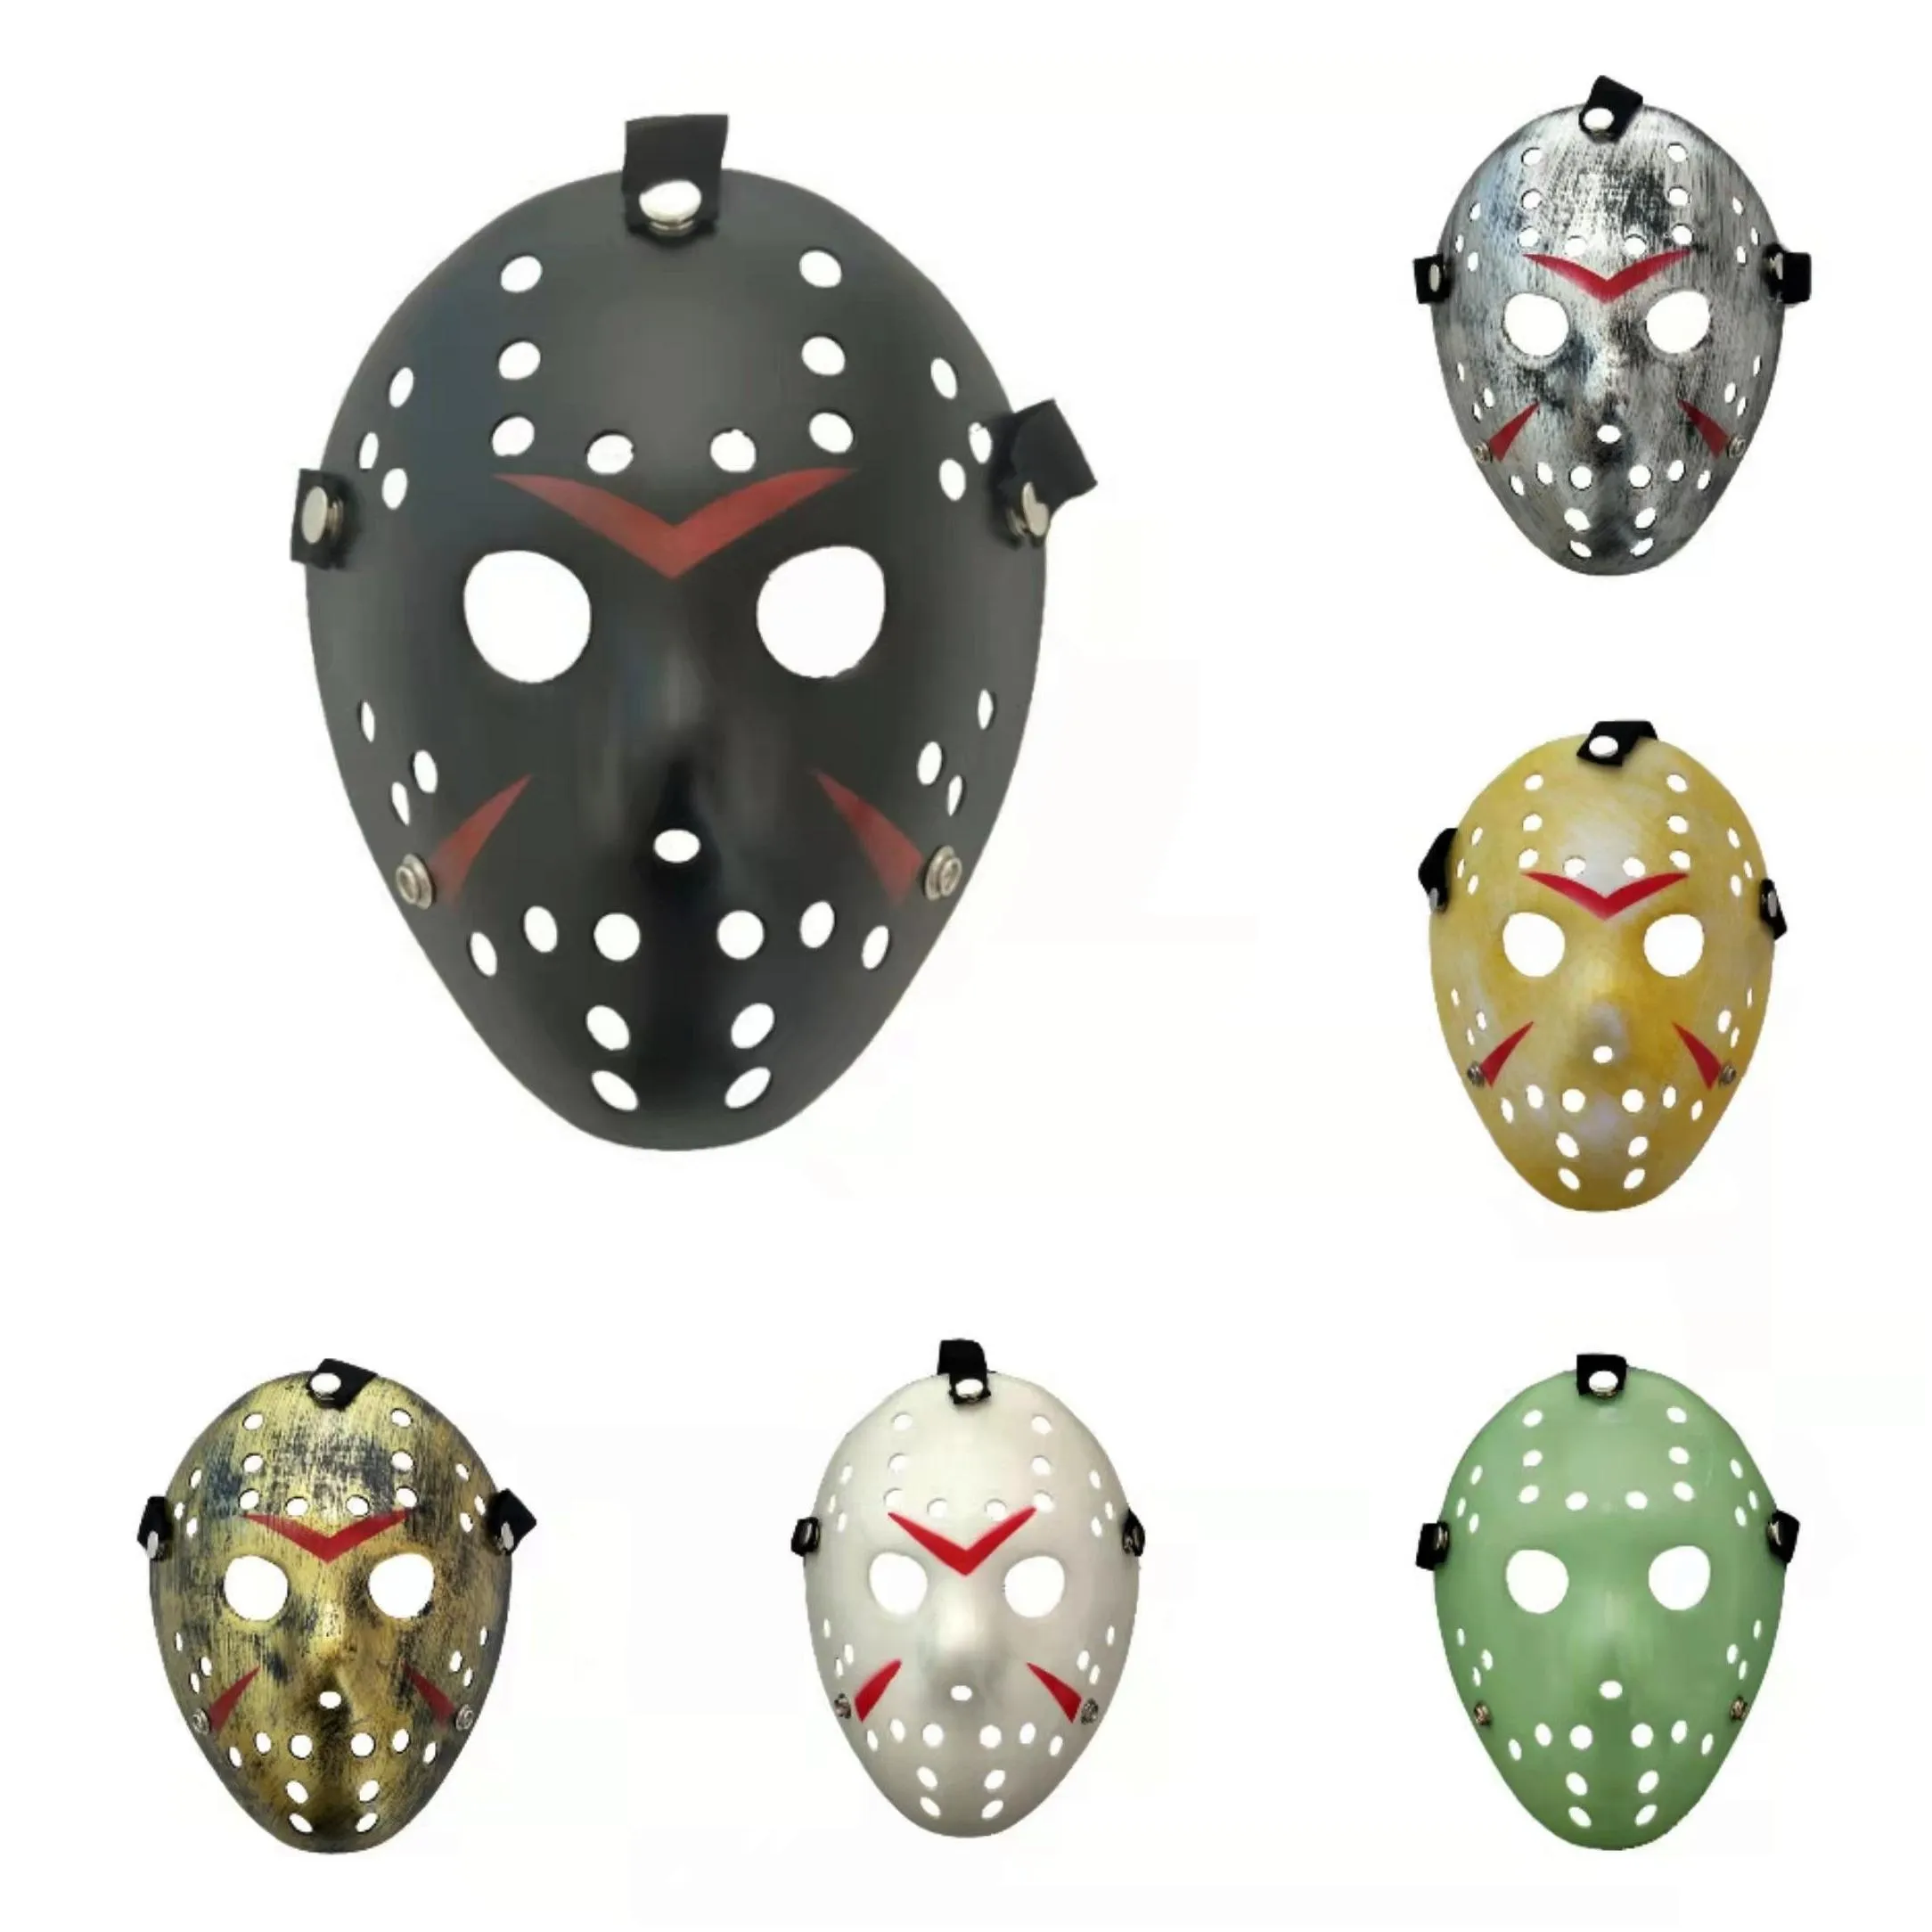 2020 Black Friday Jason Voorhees Freddy hockey Festival Party Full Face Mask Pure White PVC For Halloween Masks DH9484